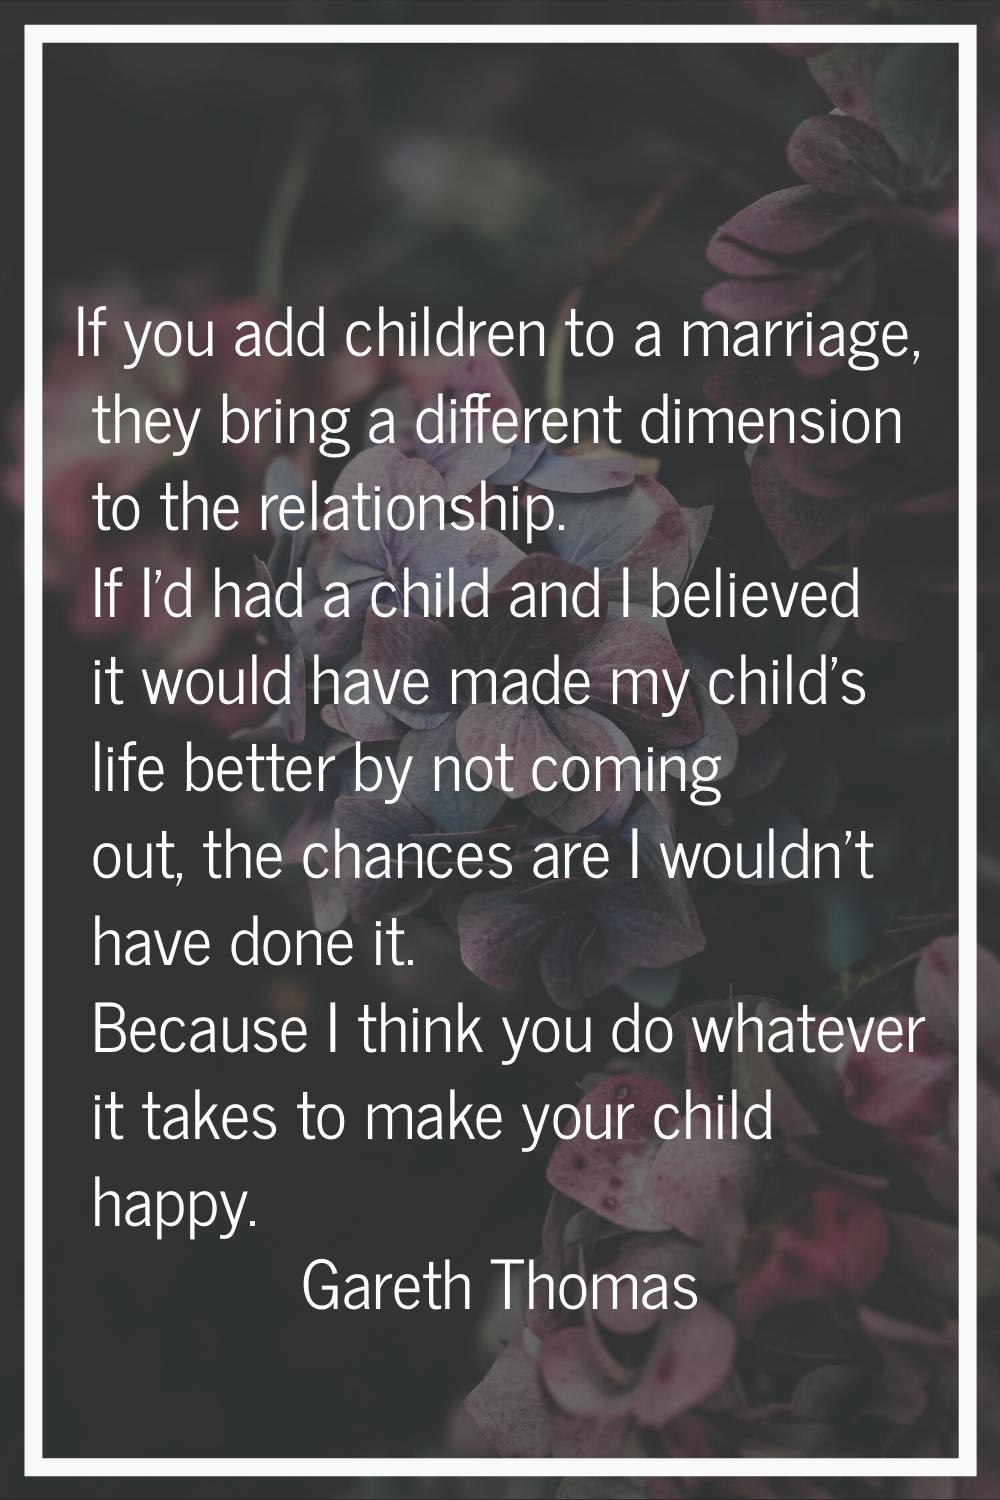 If you add children to a marriage, they bring a different dimension to the relationship. If I'd had